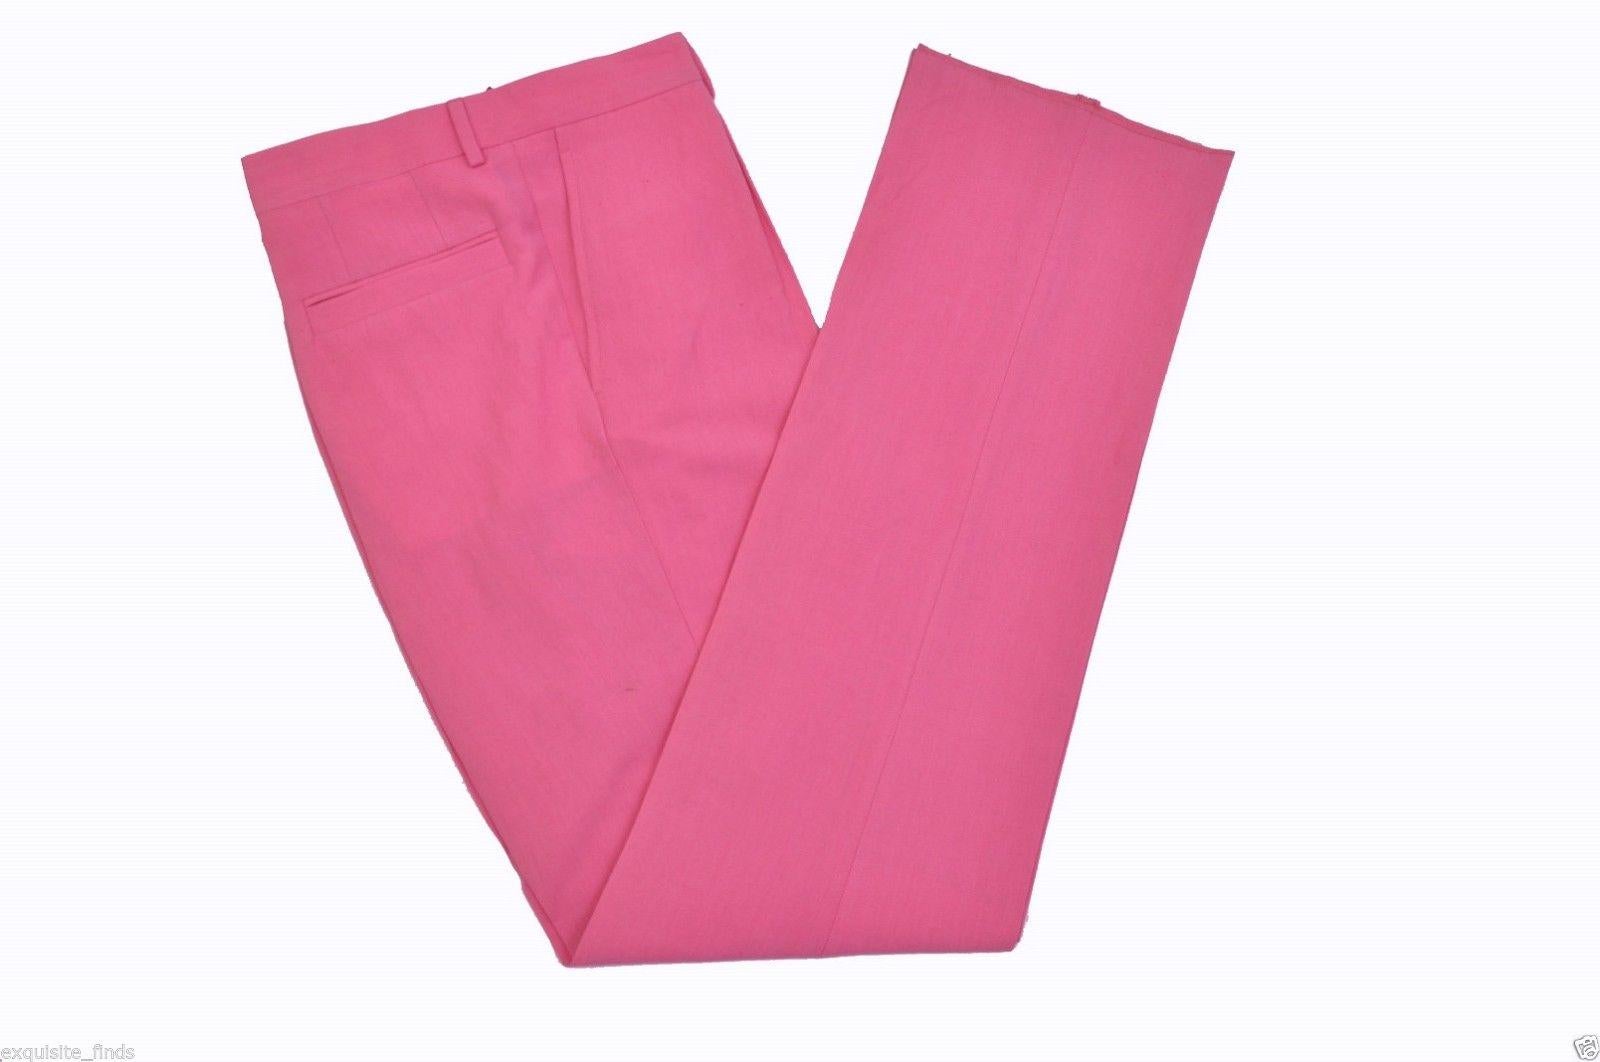 Pink BRAND NEW VERSACE TAILOR MADE PINK LINEN SUIT for MEN